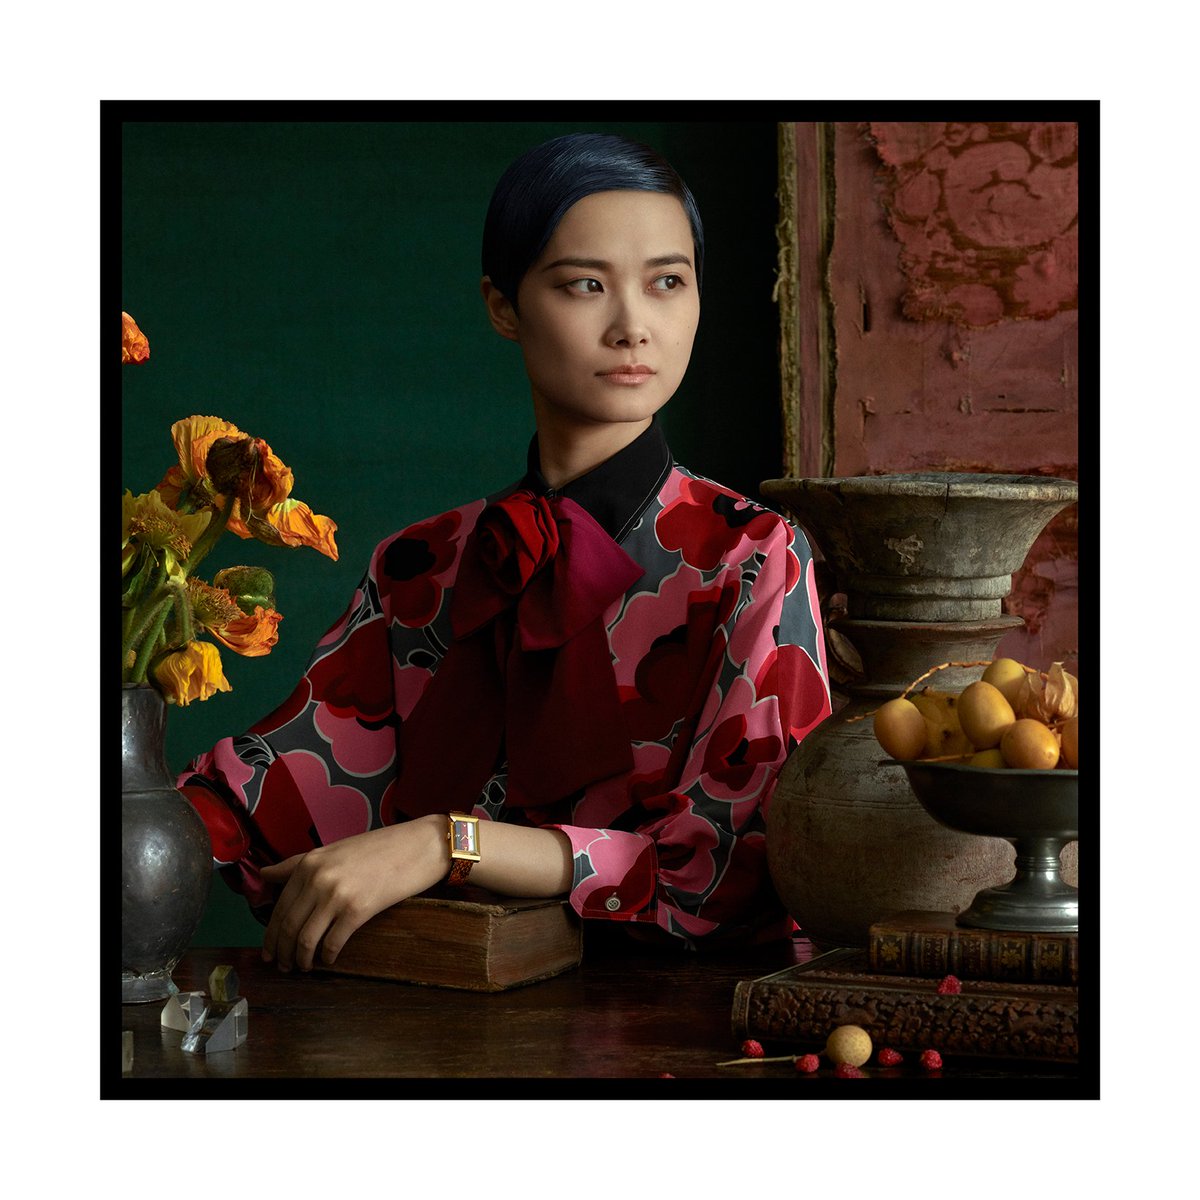 Presenting the new #GucciTimepieces and #GucciJewelry campaign featuring #ChrisLee. Shot by #JuliaHetta, the imagery evokes Flemish still life paintings from the Dutch Golden Age.
Art Direction: Christopher Simmonds